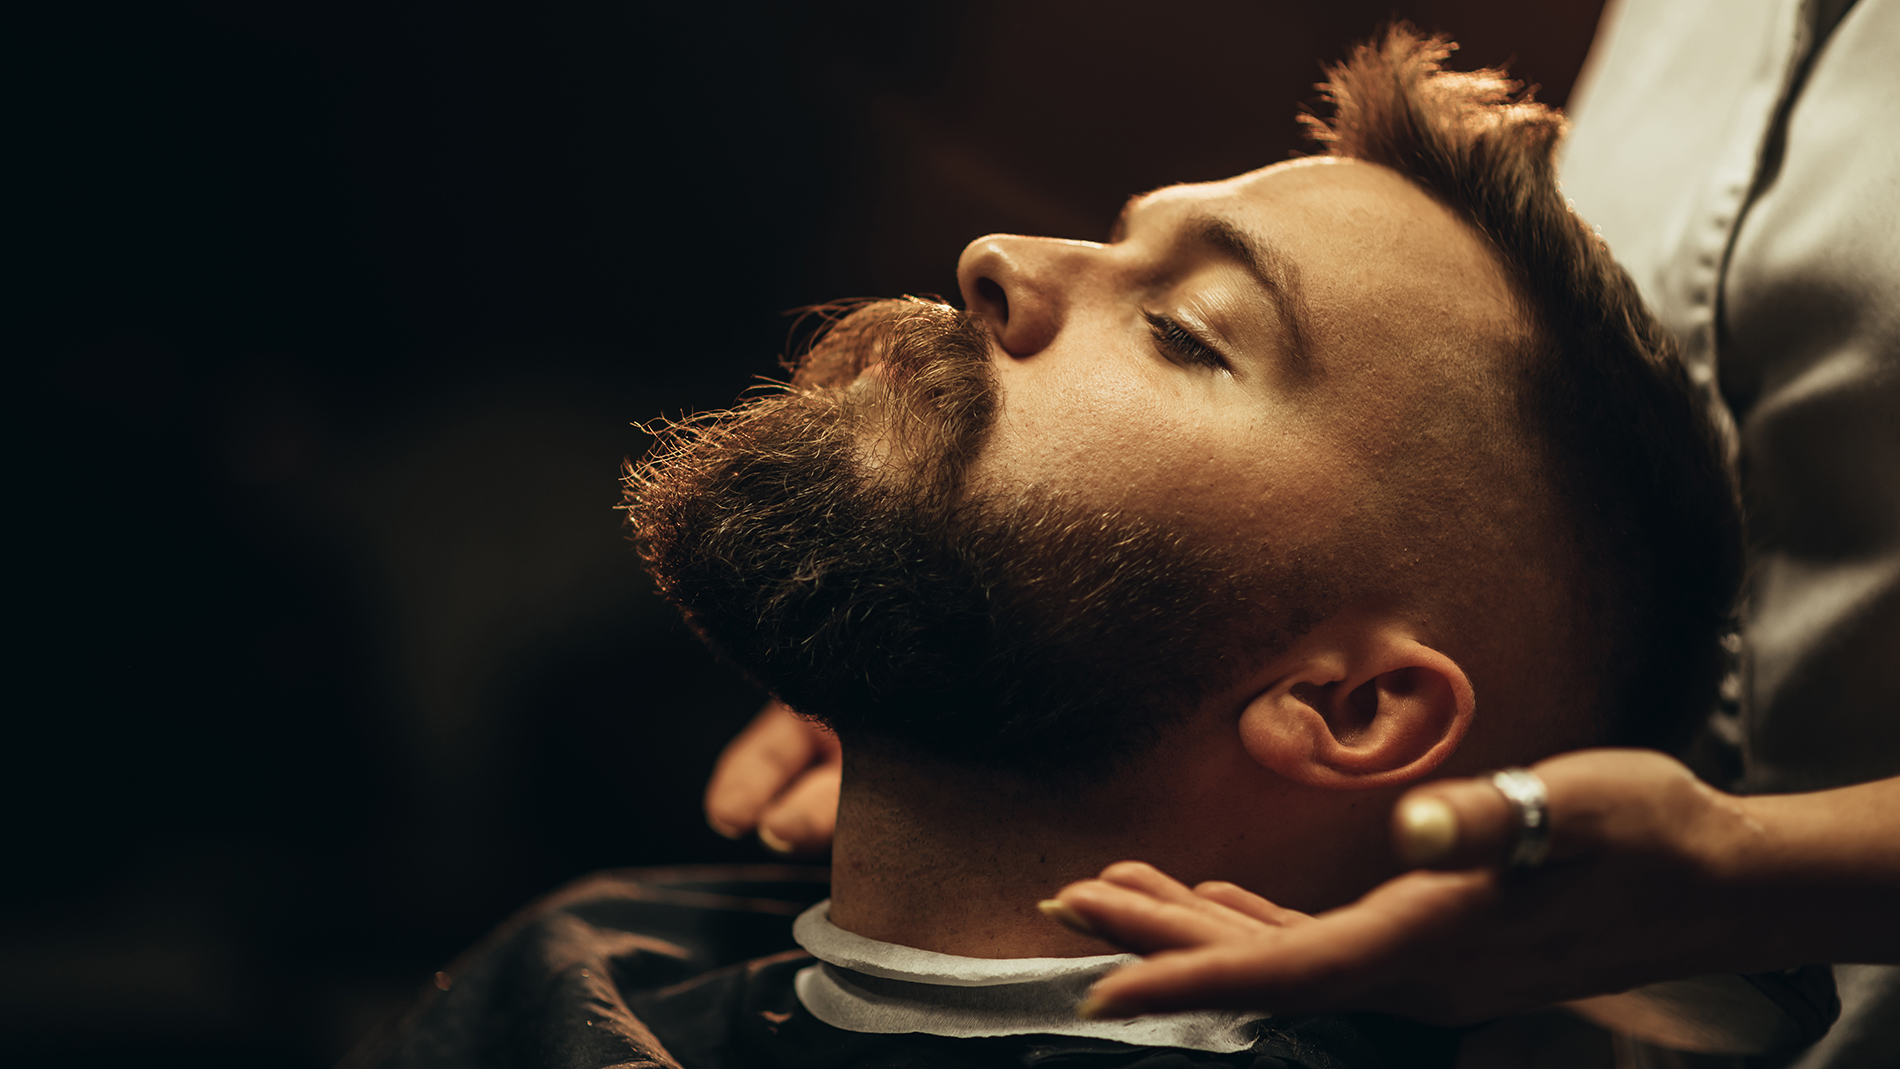 Close shot of a young man beard while he is sitting at a barbershop